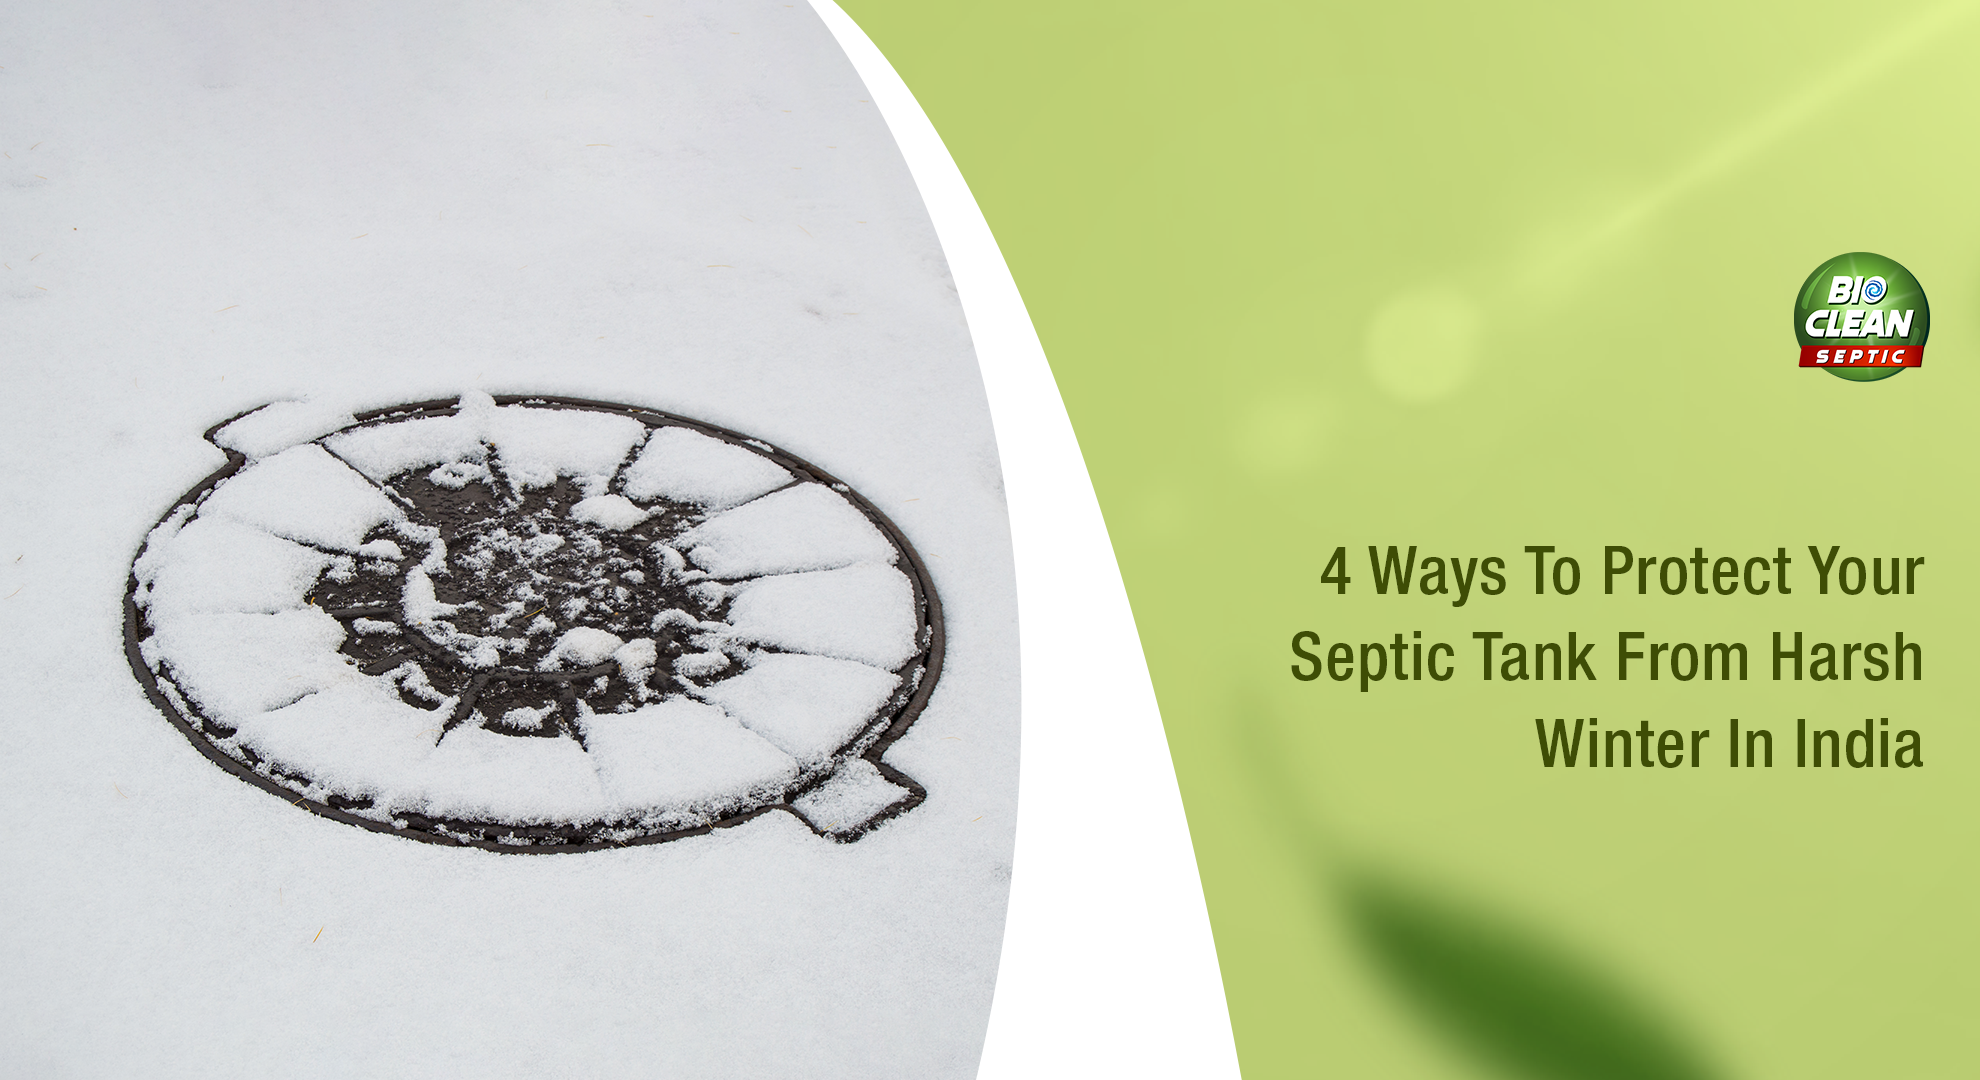 4 Ways To Protect Your Septic Tank From Harsh Winter In India